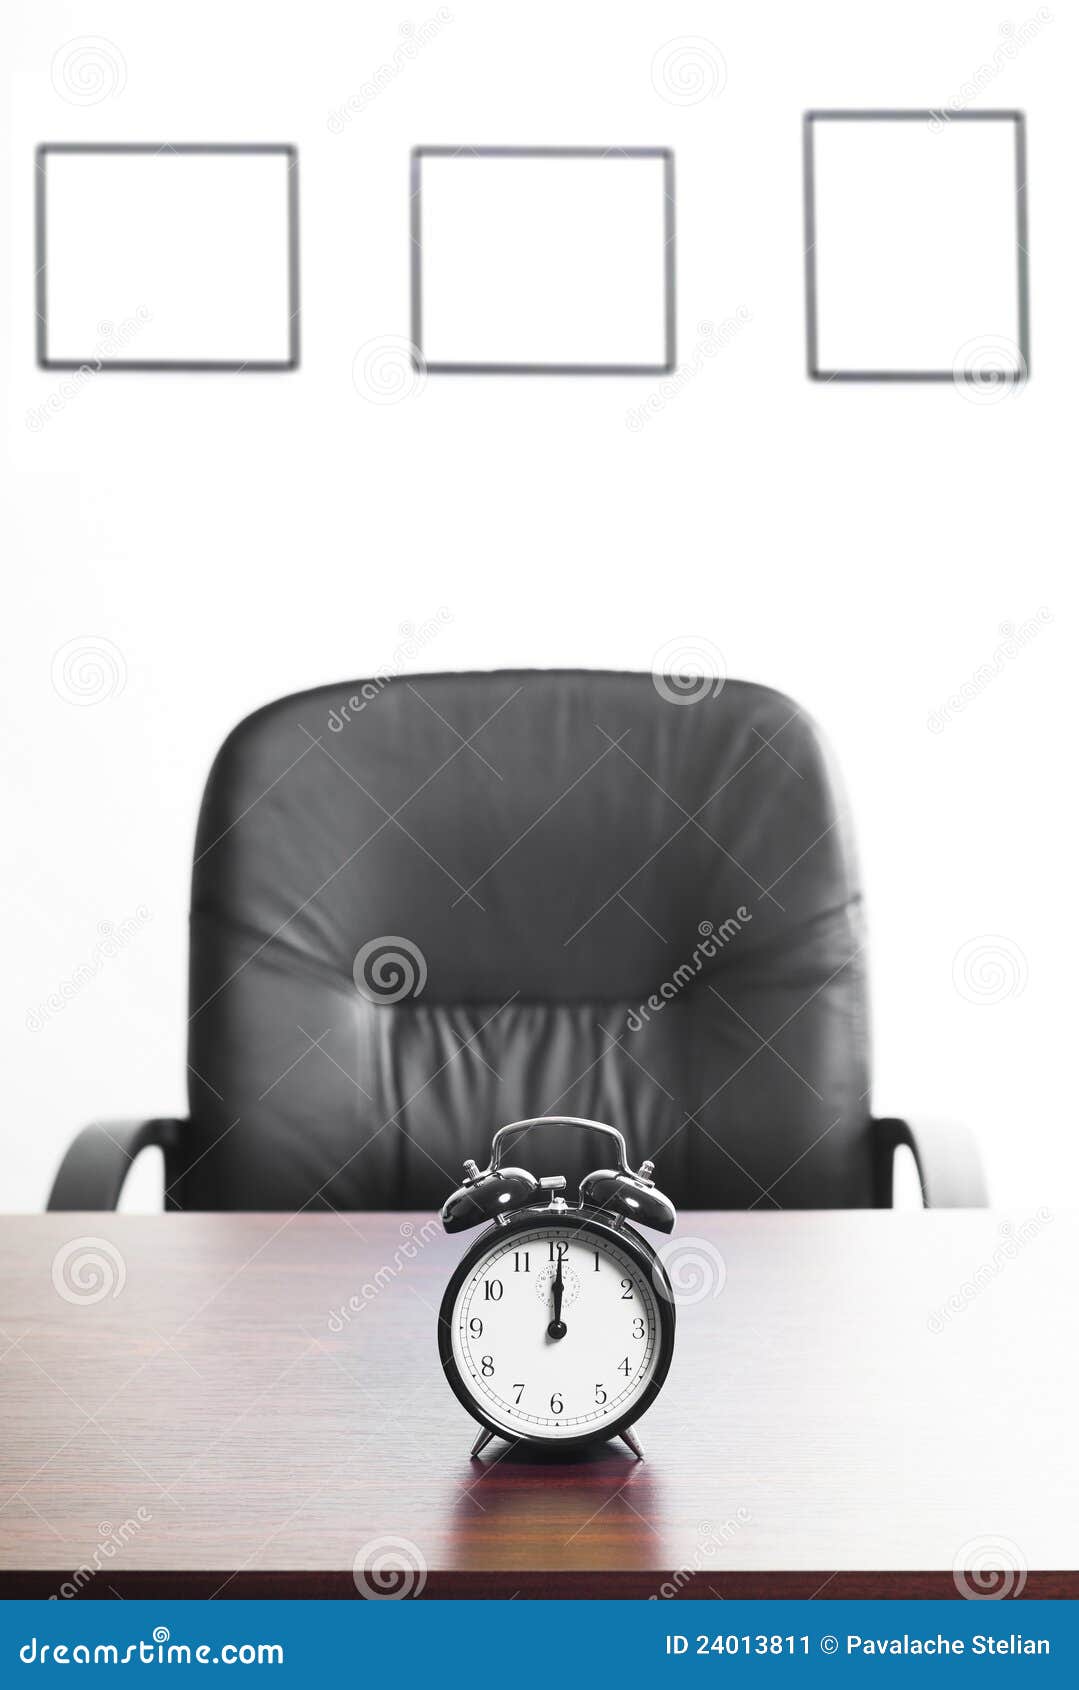 punctuality in business